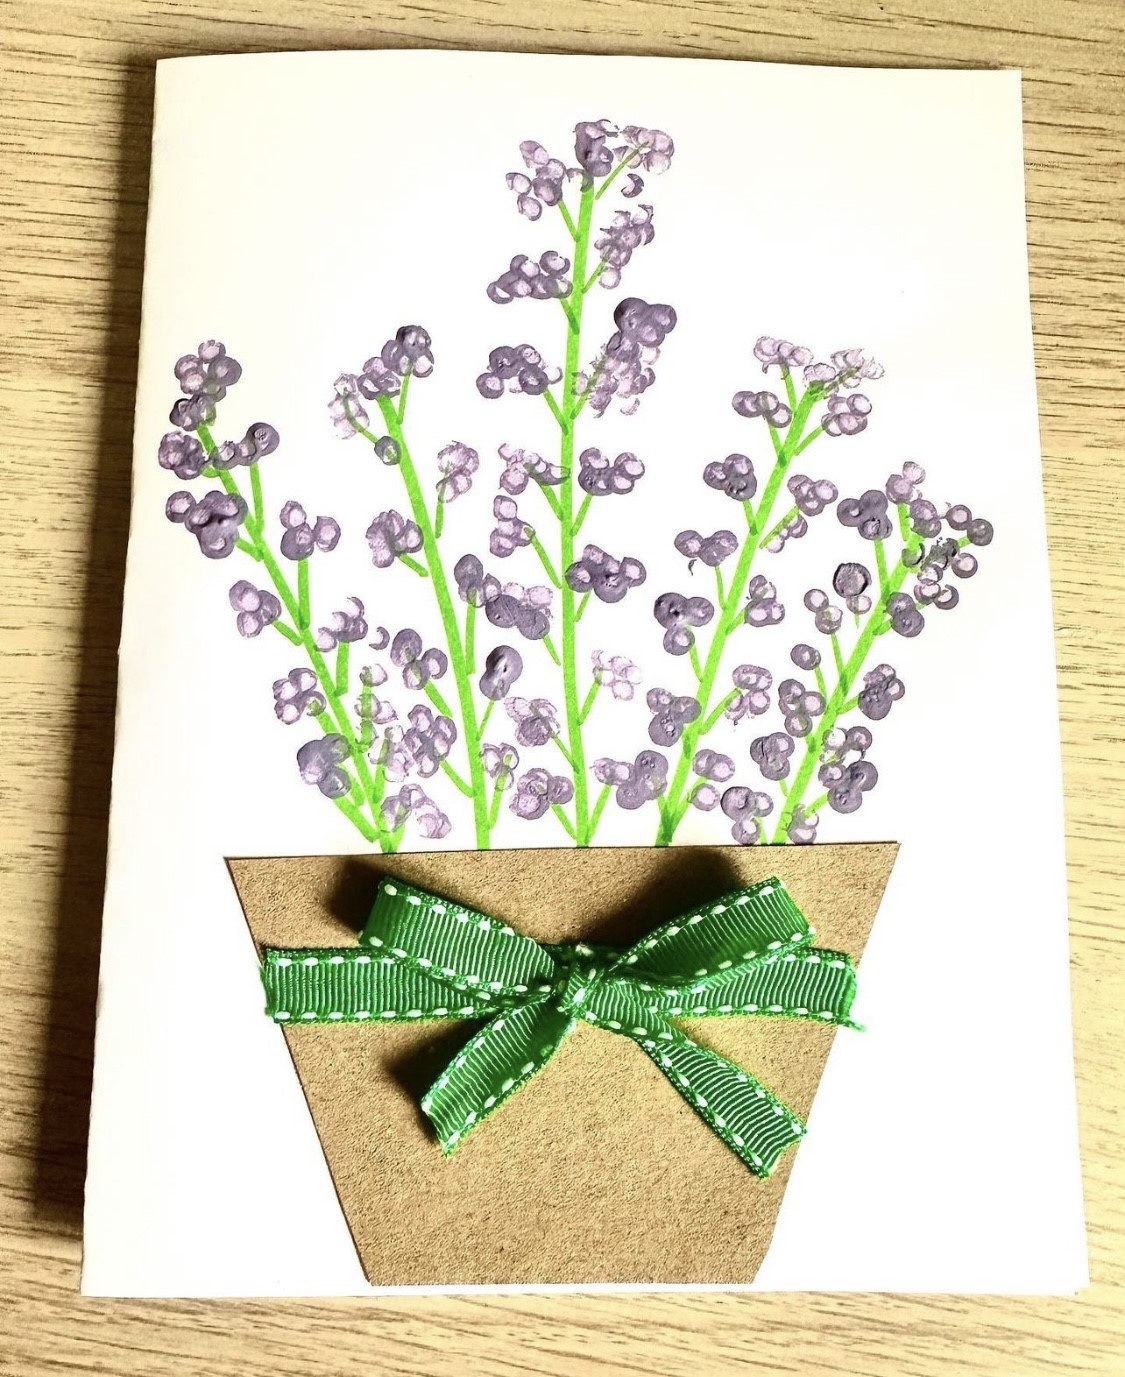 painted purple flowers in a pot with a green bow